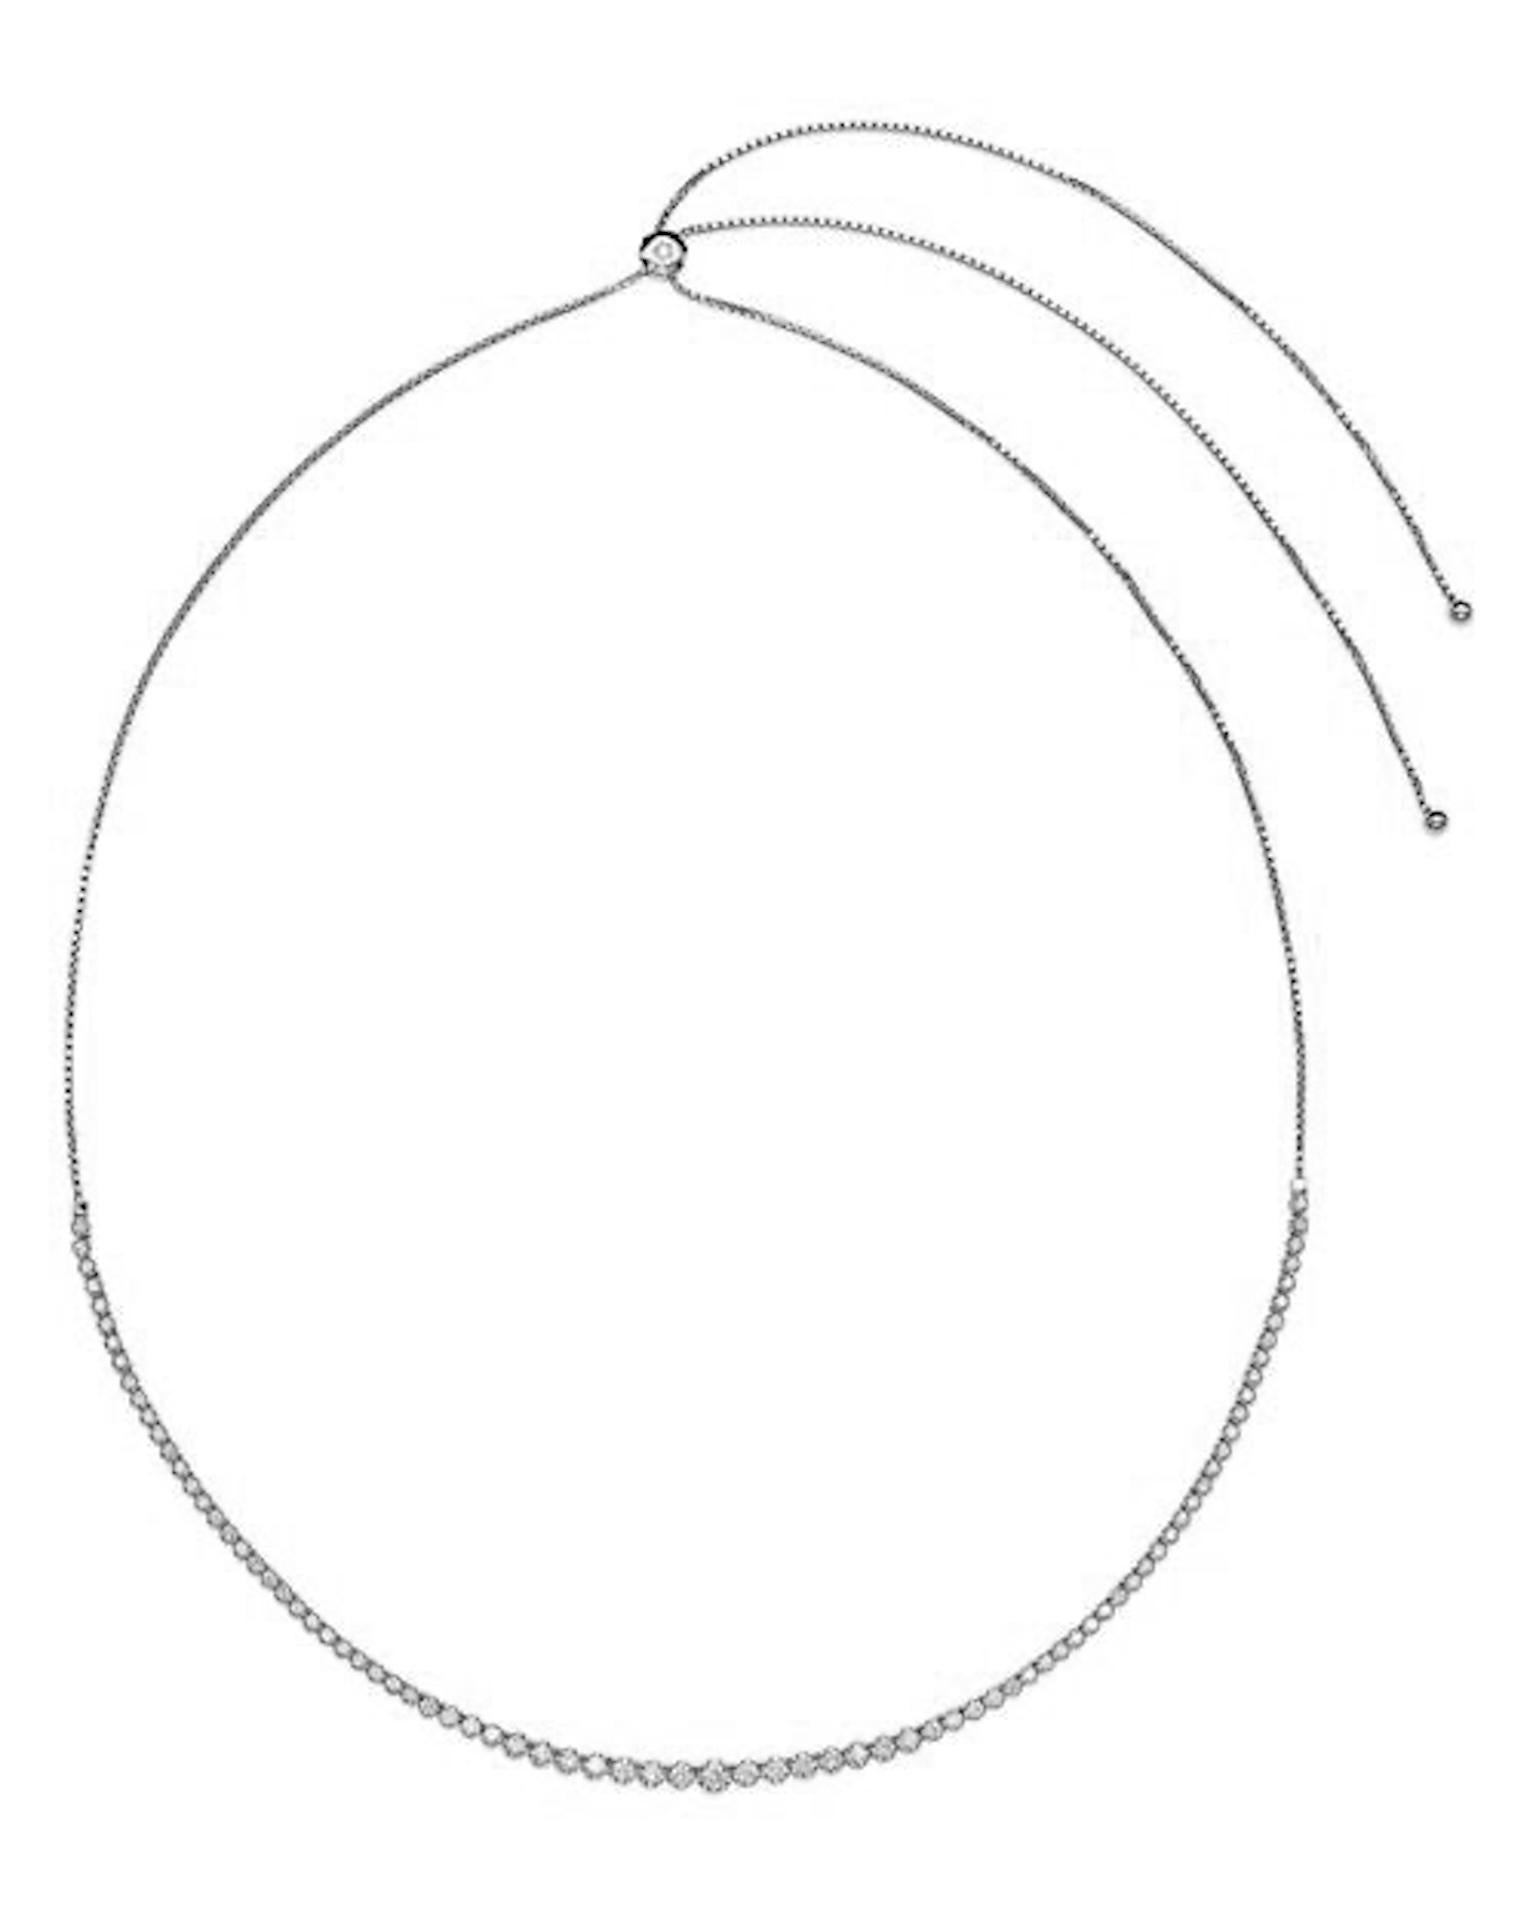 Modern Diana M. Custom 3.50 Cts Round Diamond 14k White Gold Graduated Bolo Necklace For Sale